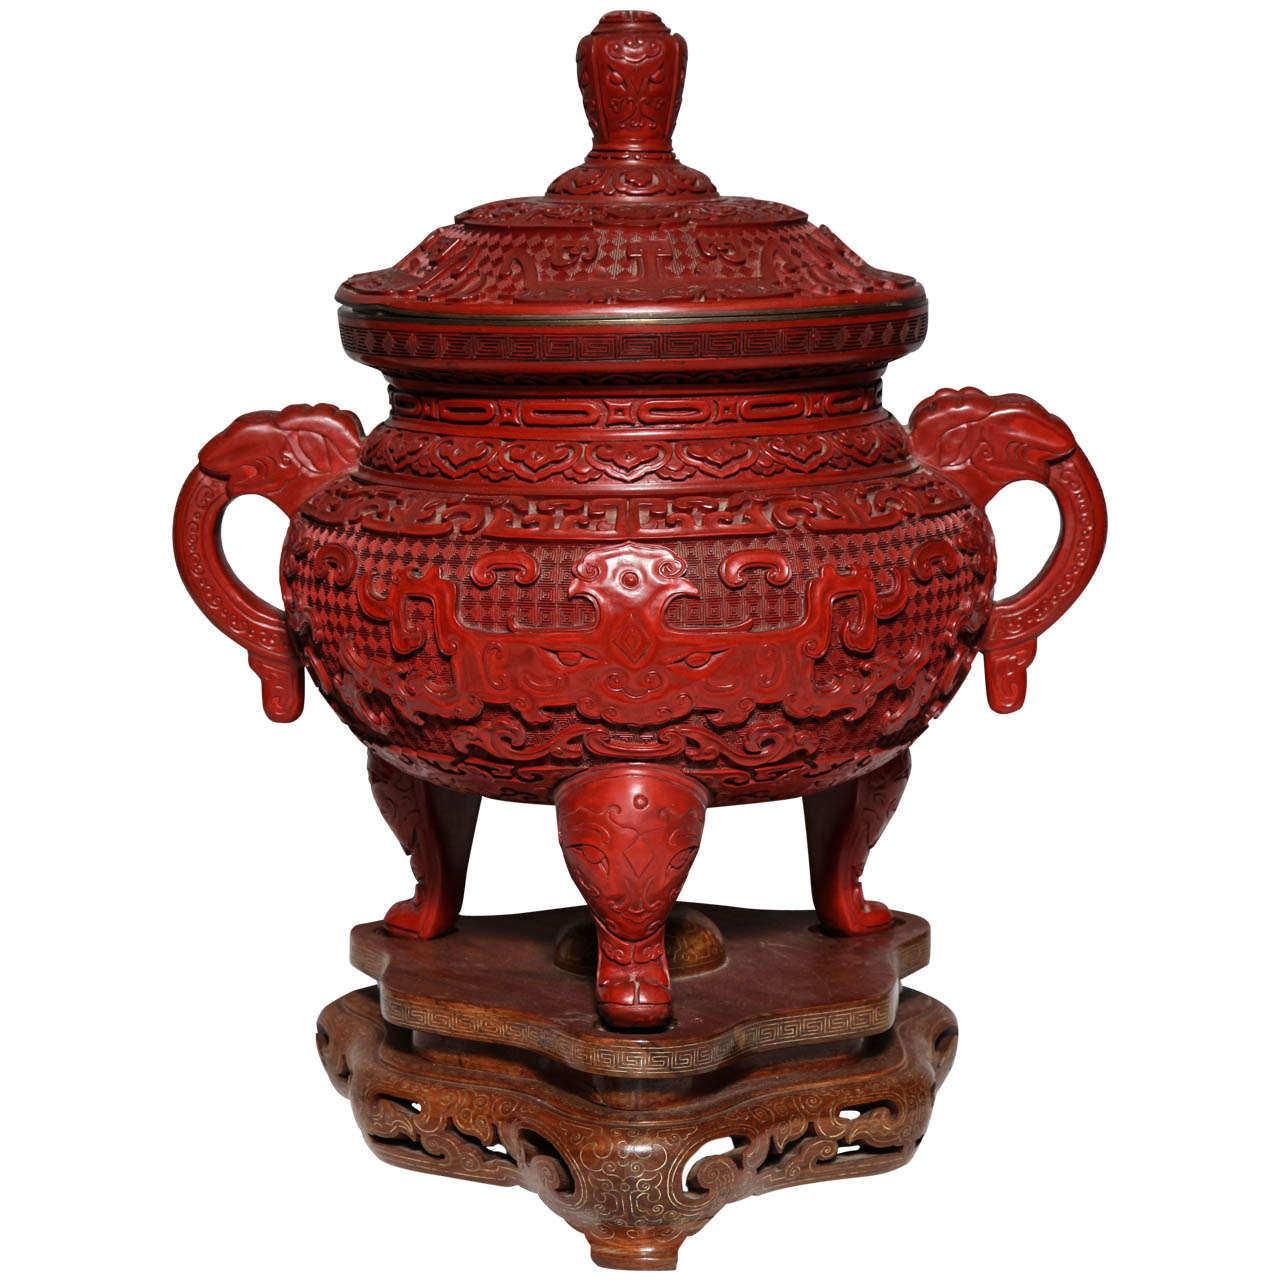 A Monumental Chinese Cinnabar Red Lacquer Incense Burner of Archaic Form and Decoration